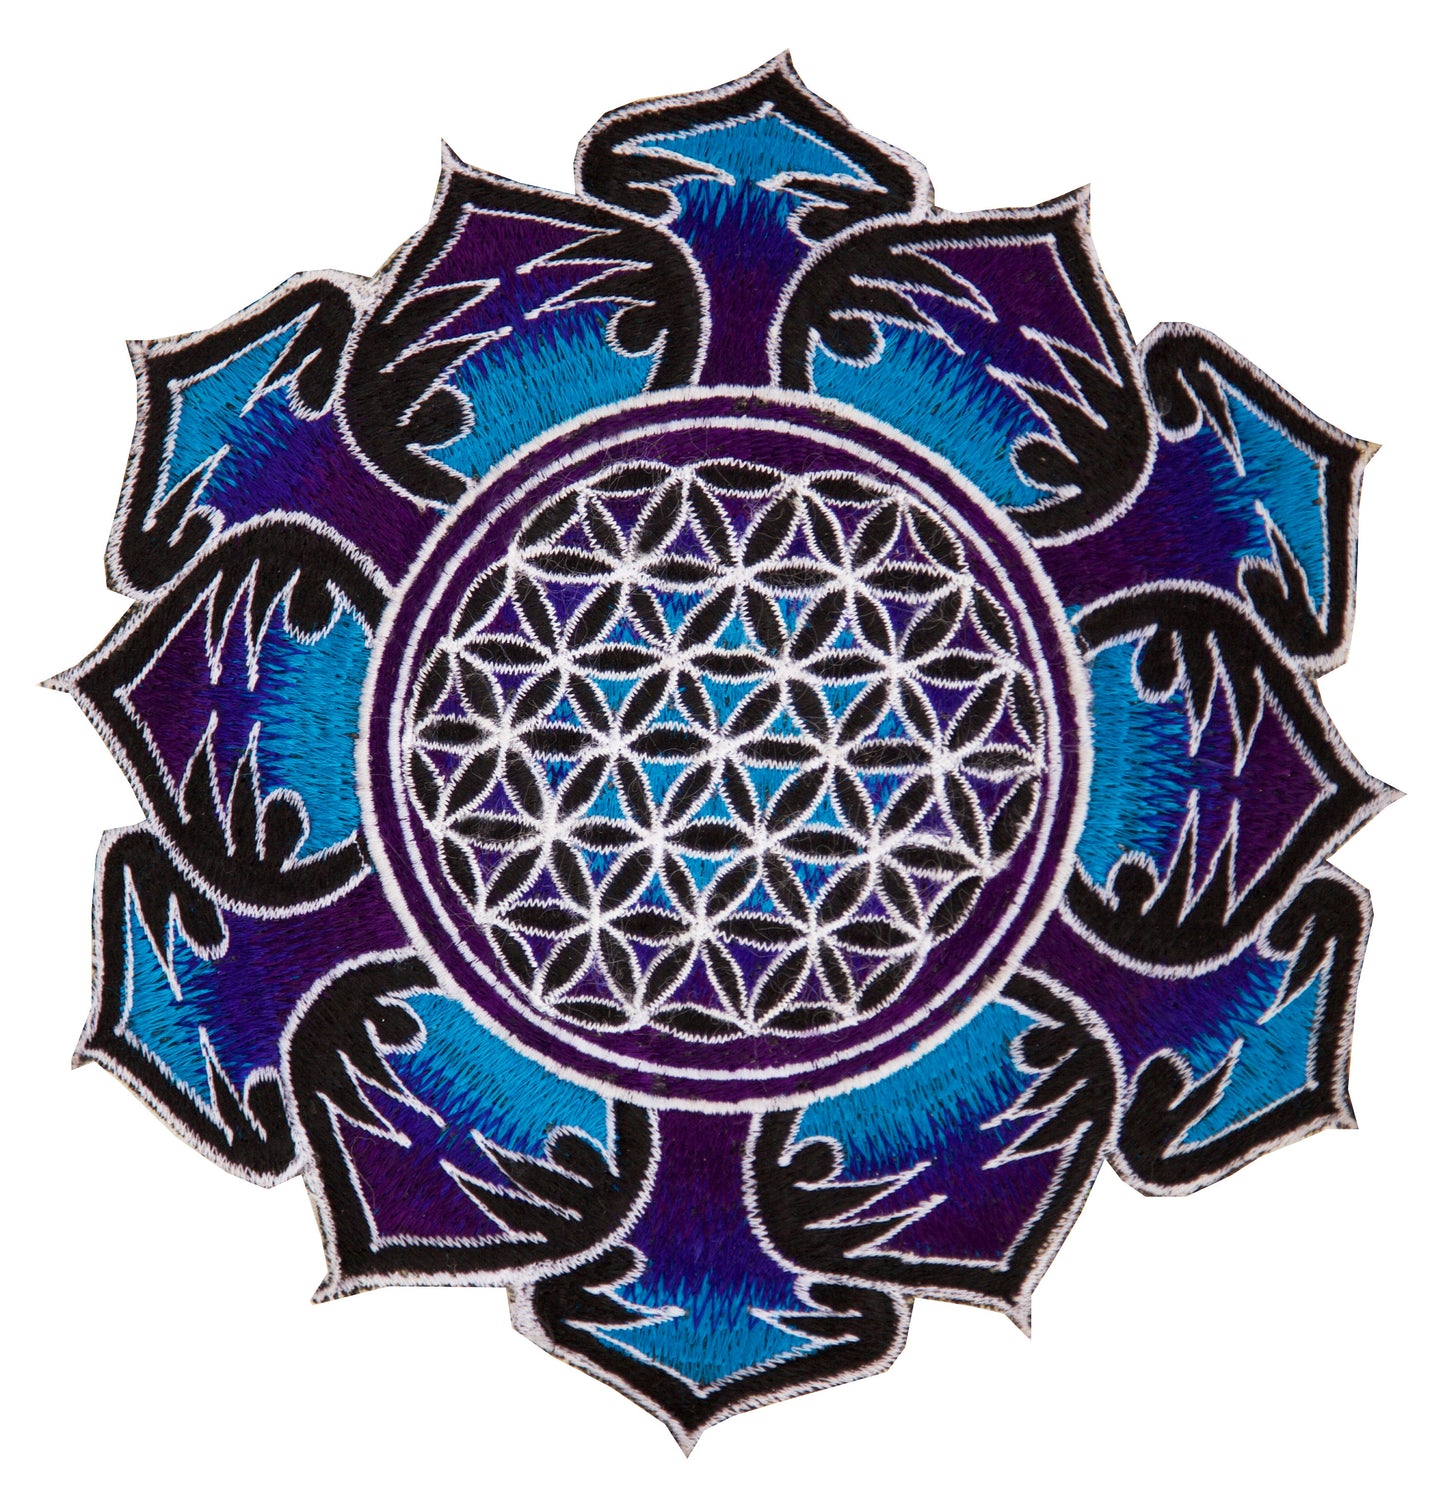 Blue white Flower of Life embroidery patch for sew on - holy geometry sacred healing energy art